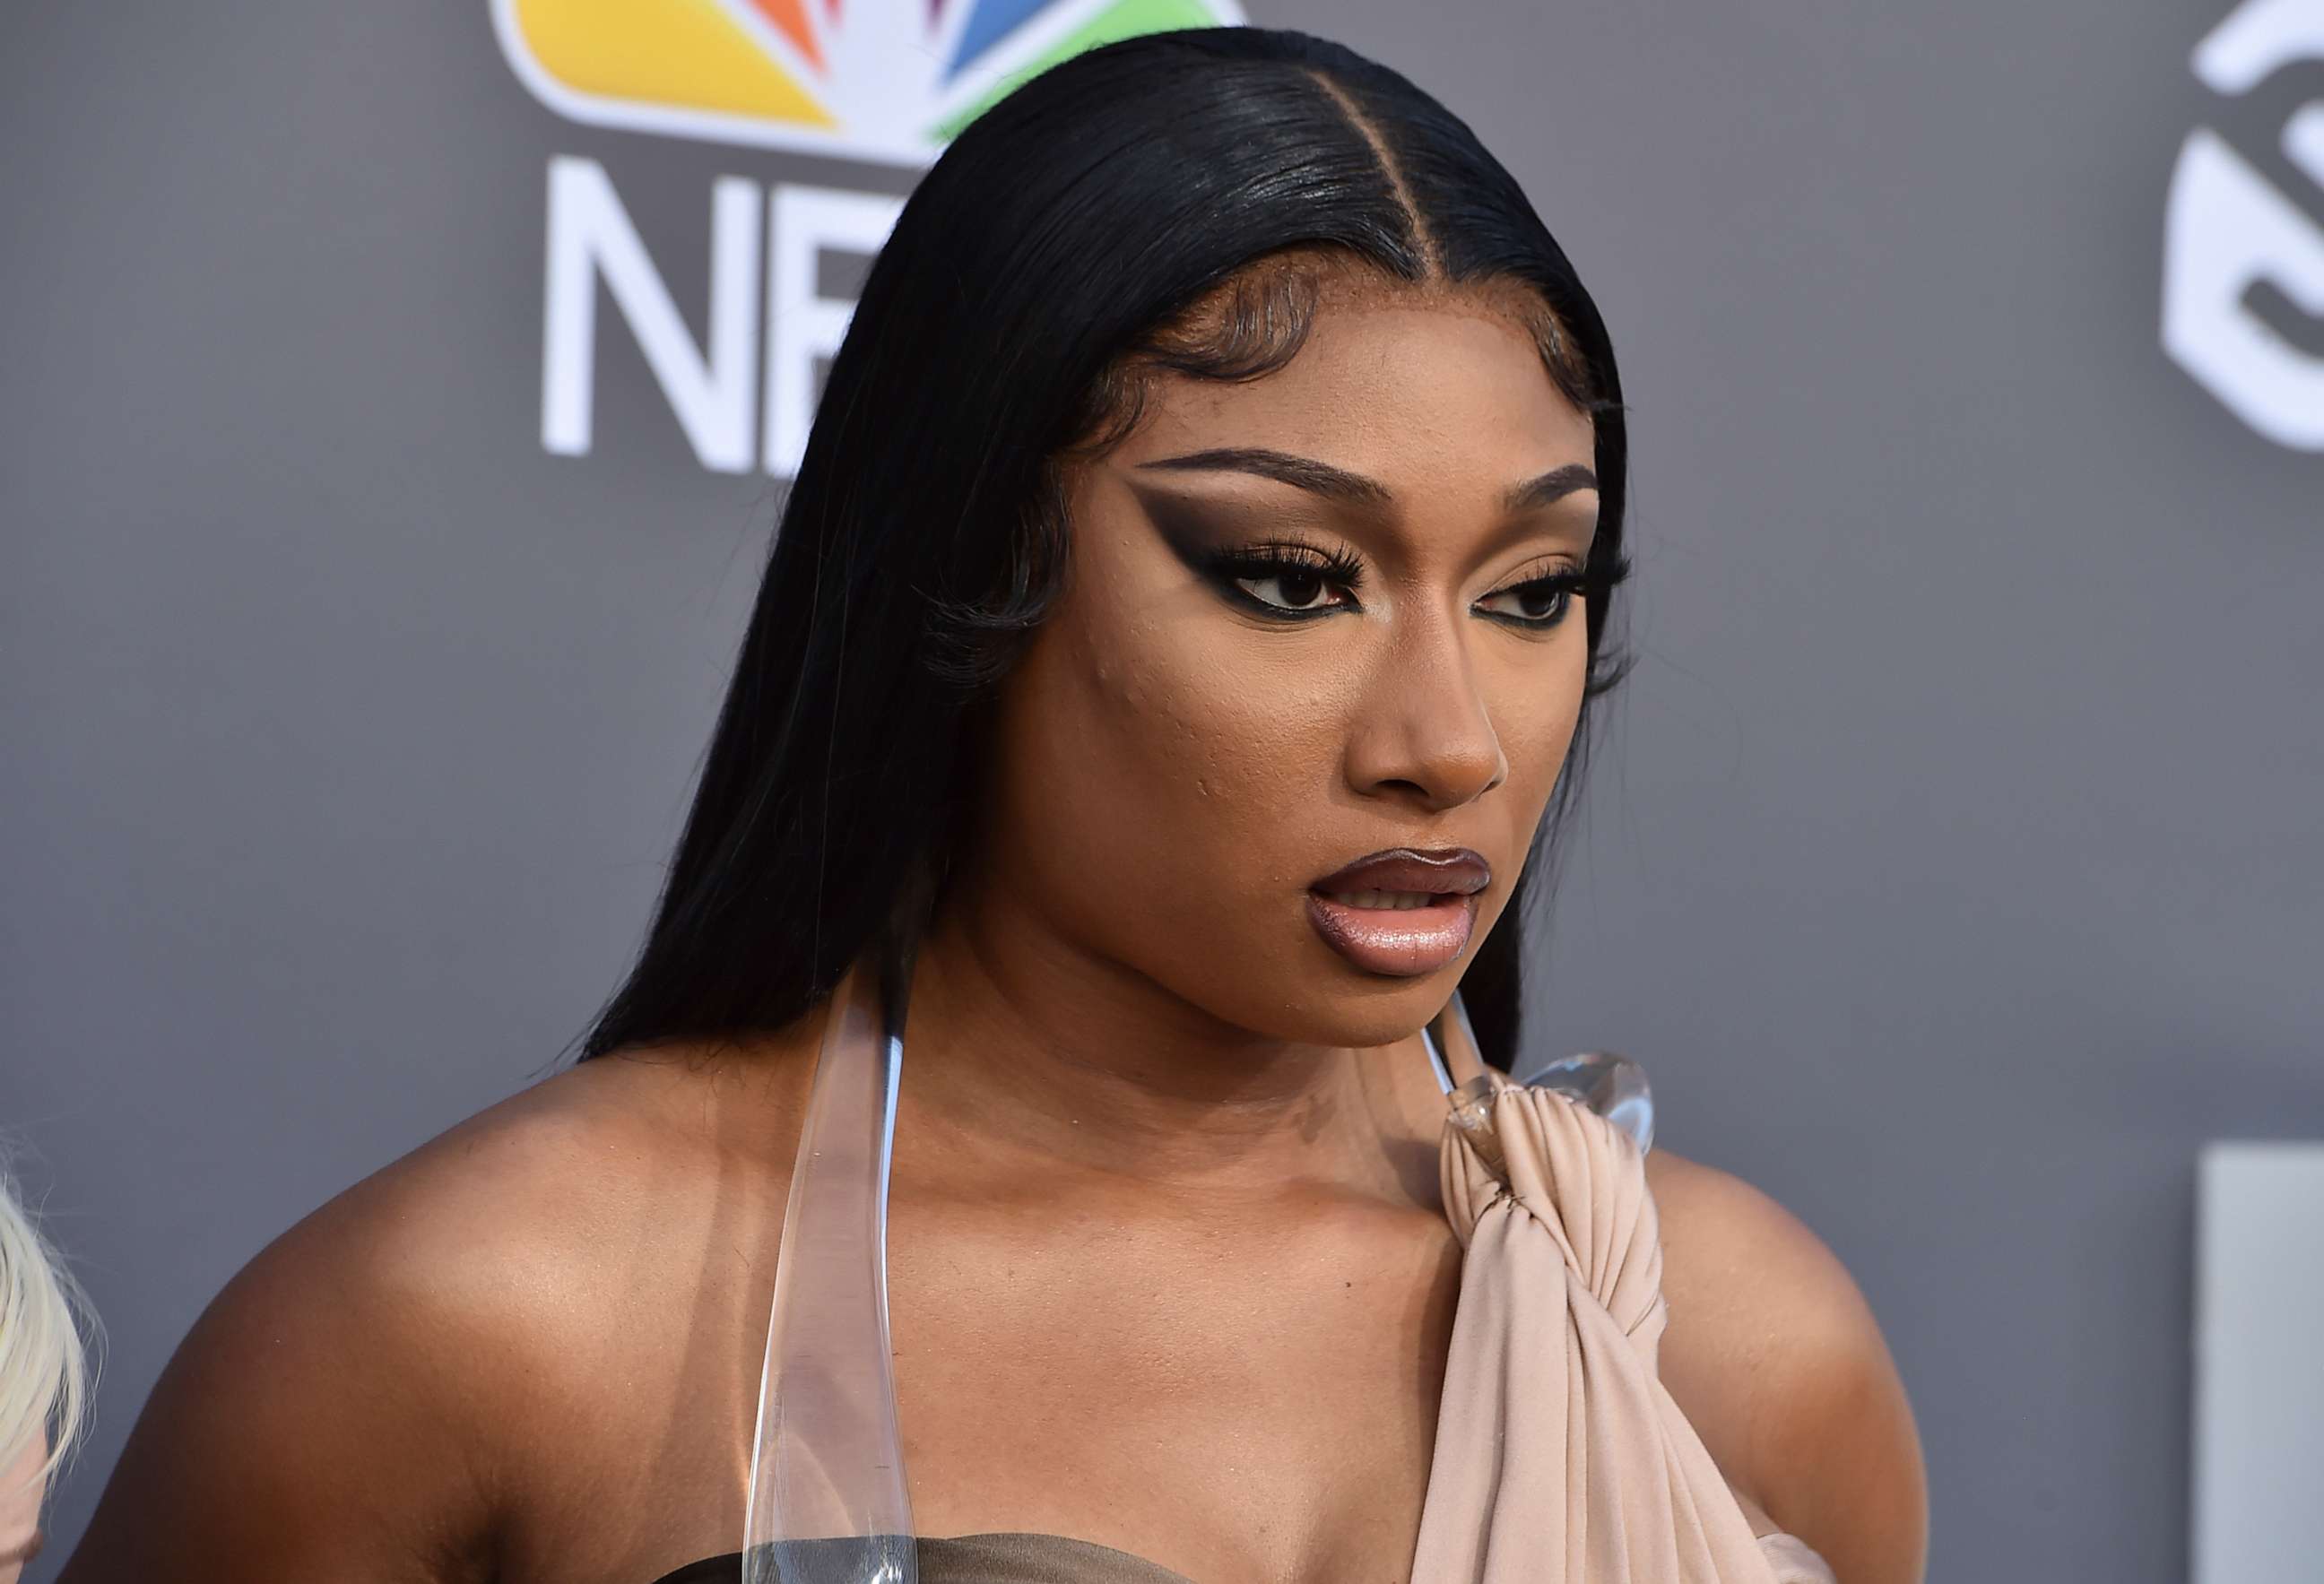 PHOTO: In this May 15, 2022, file photo, Megan Thee Stallion arrives at the Billboard Music Awards at the MGM Grand Garden Arena in Las Vegas.